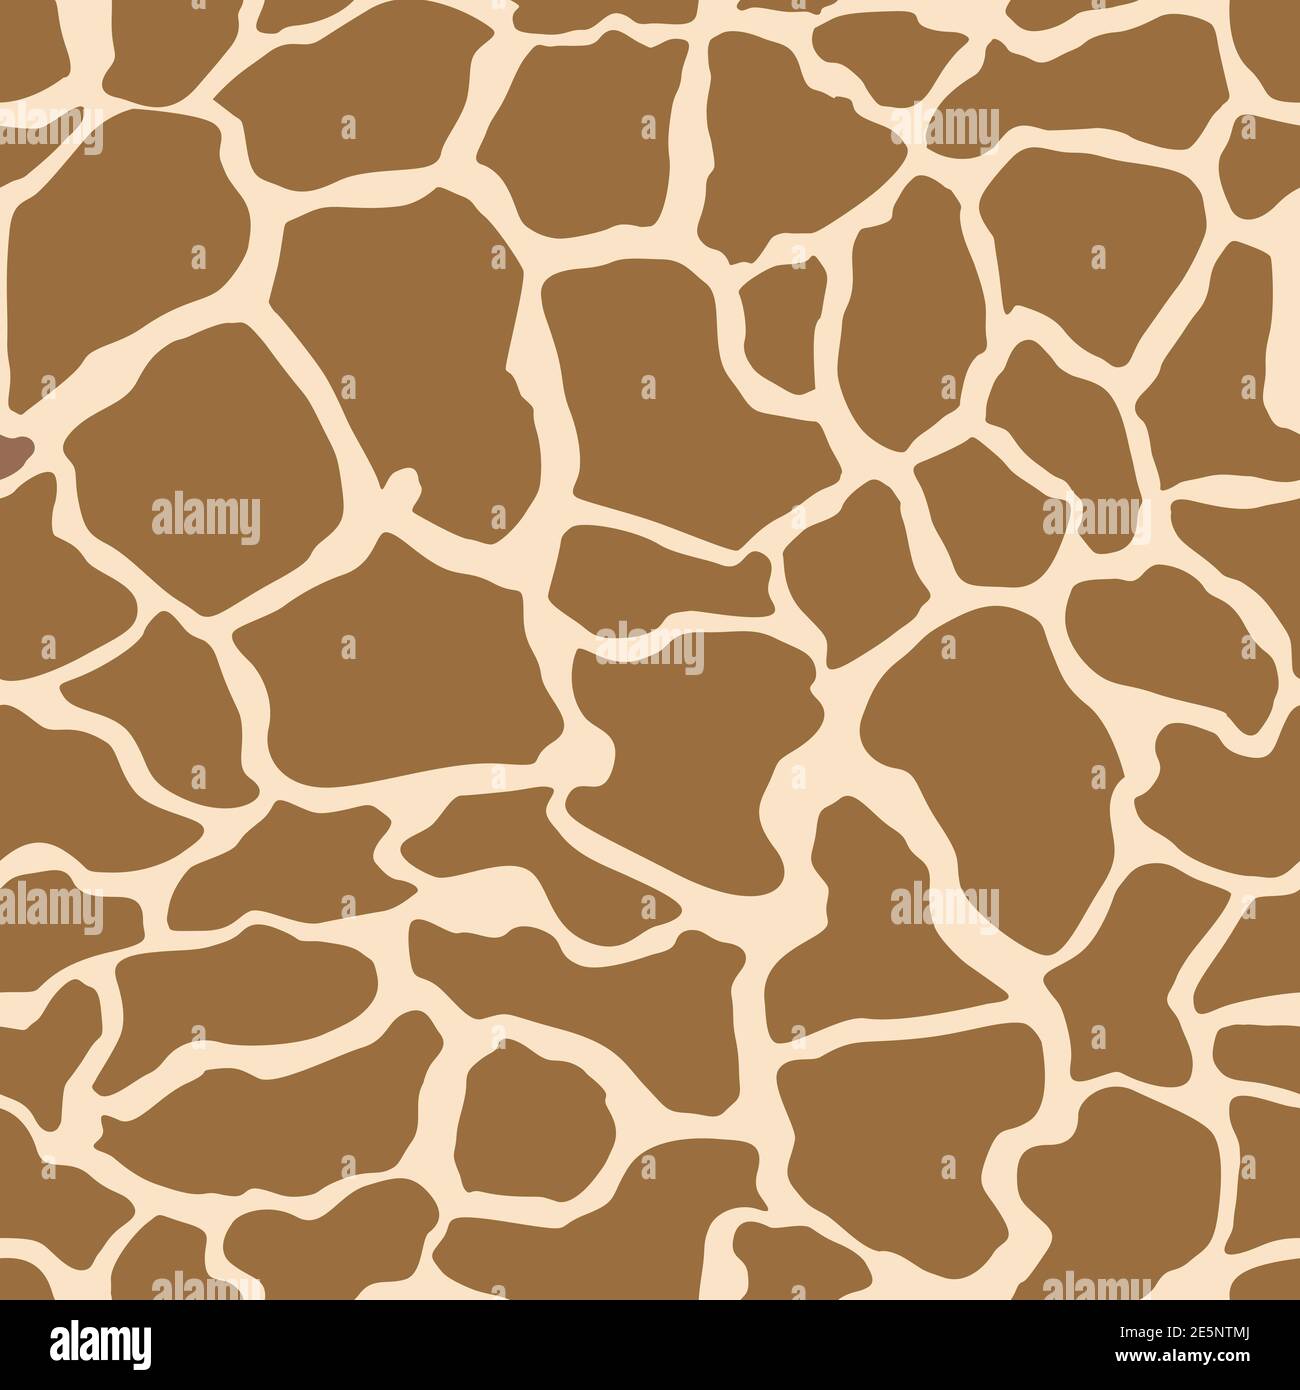 Seamless Repeating Giraffe Pattern. Perfect for kinds clothing print, wallpapers, background etc. Stock Vector